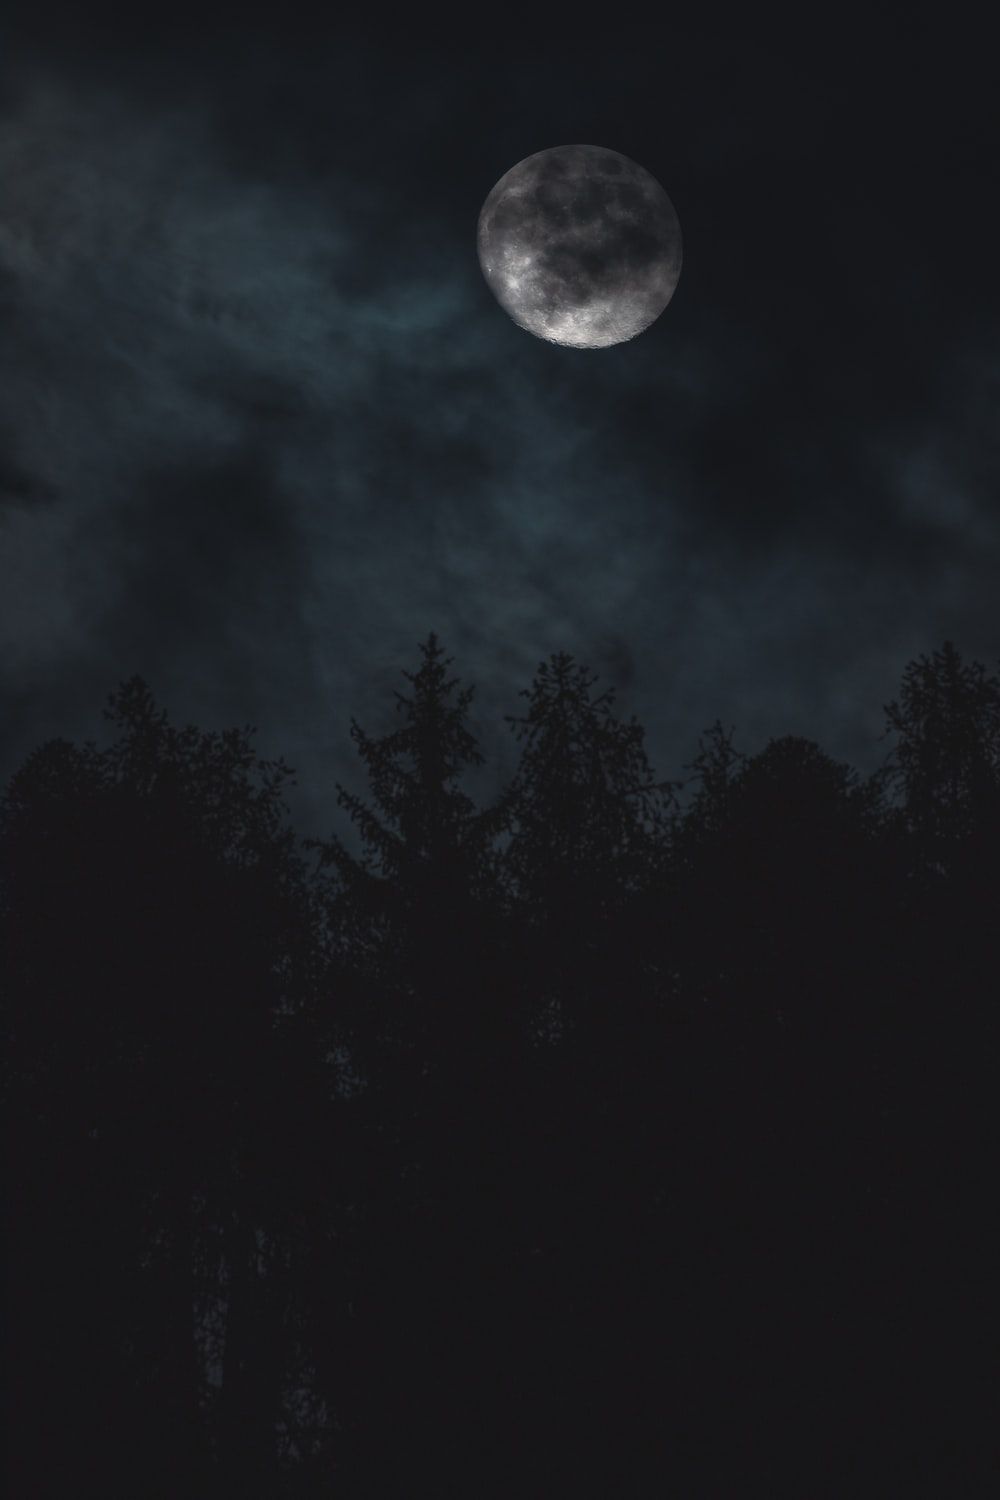 Scary Night Picture. Download Free Image